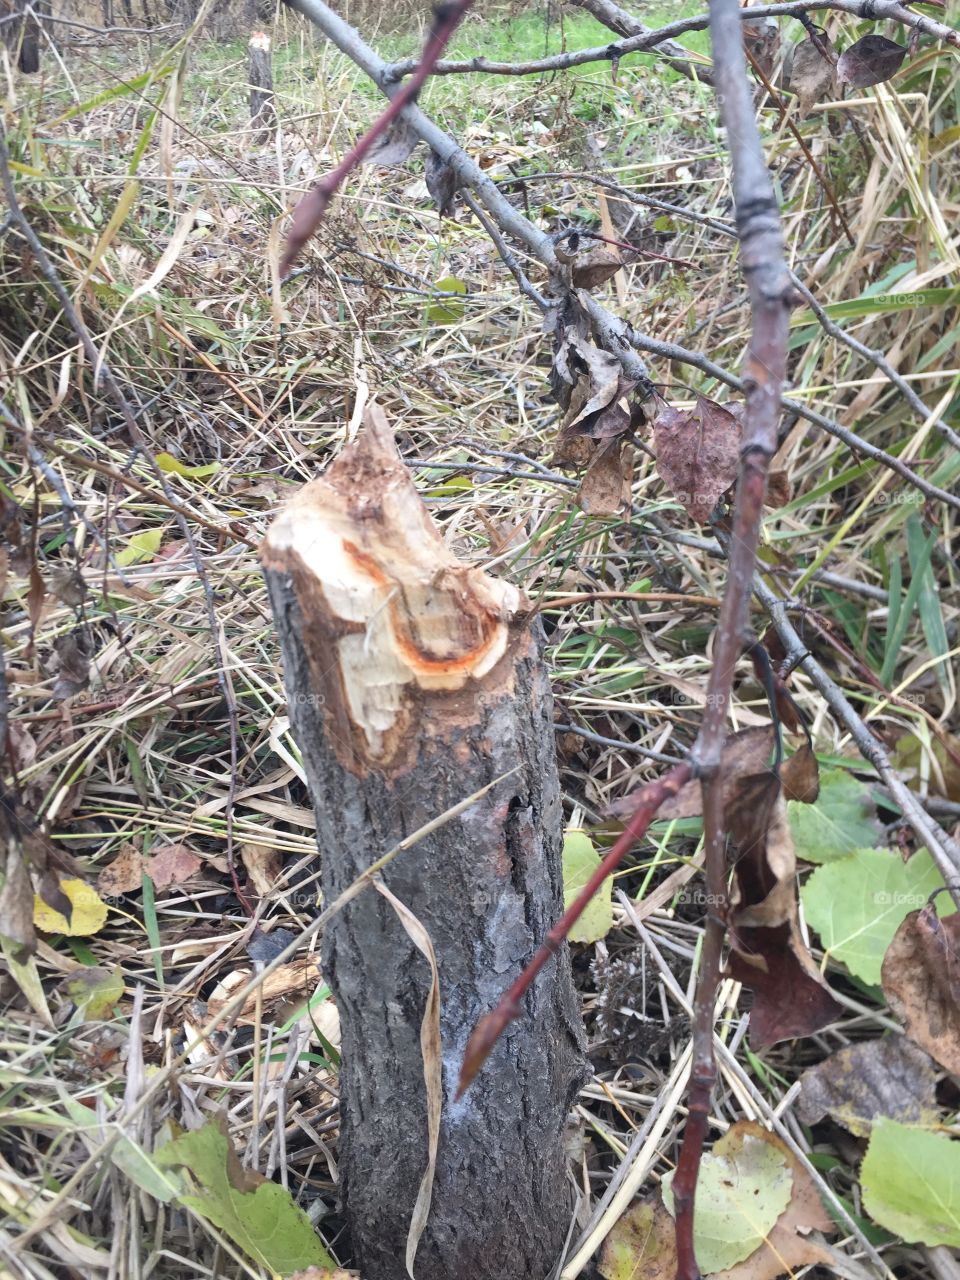 This tree is a Result of the beavers work , amazing how they can do this work with teeth.